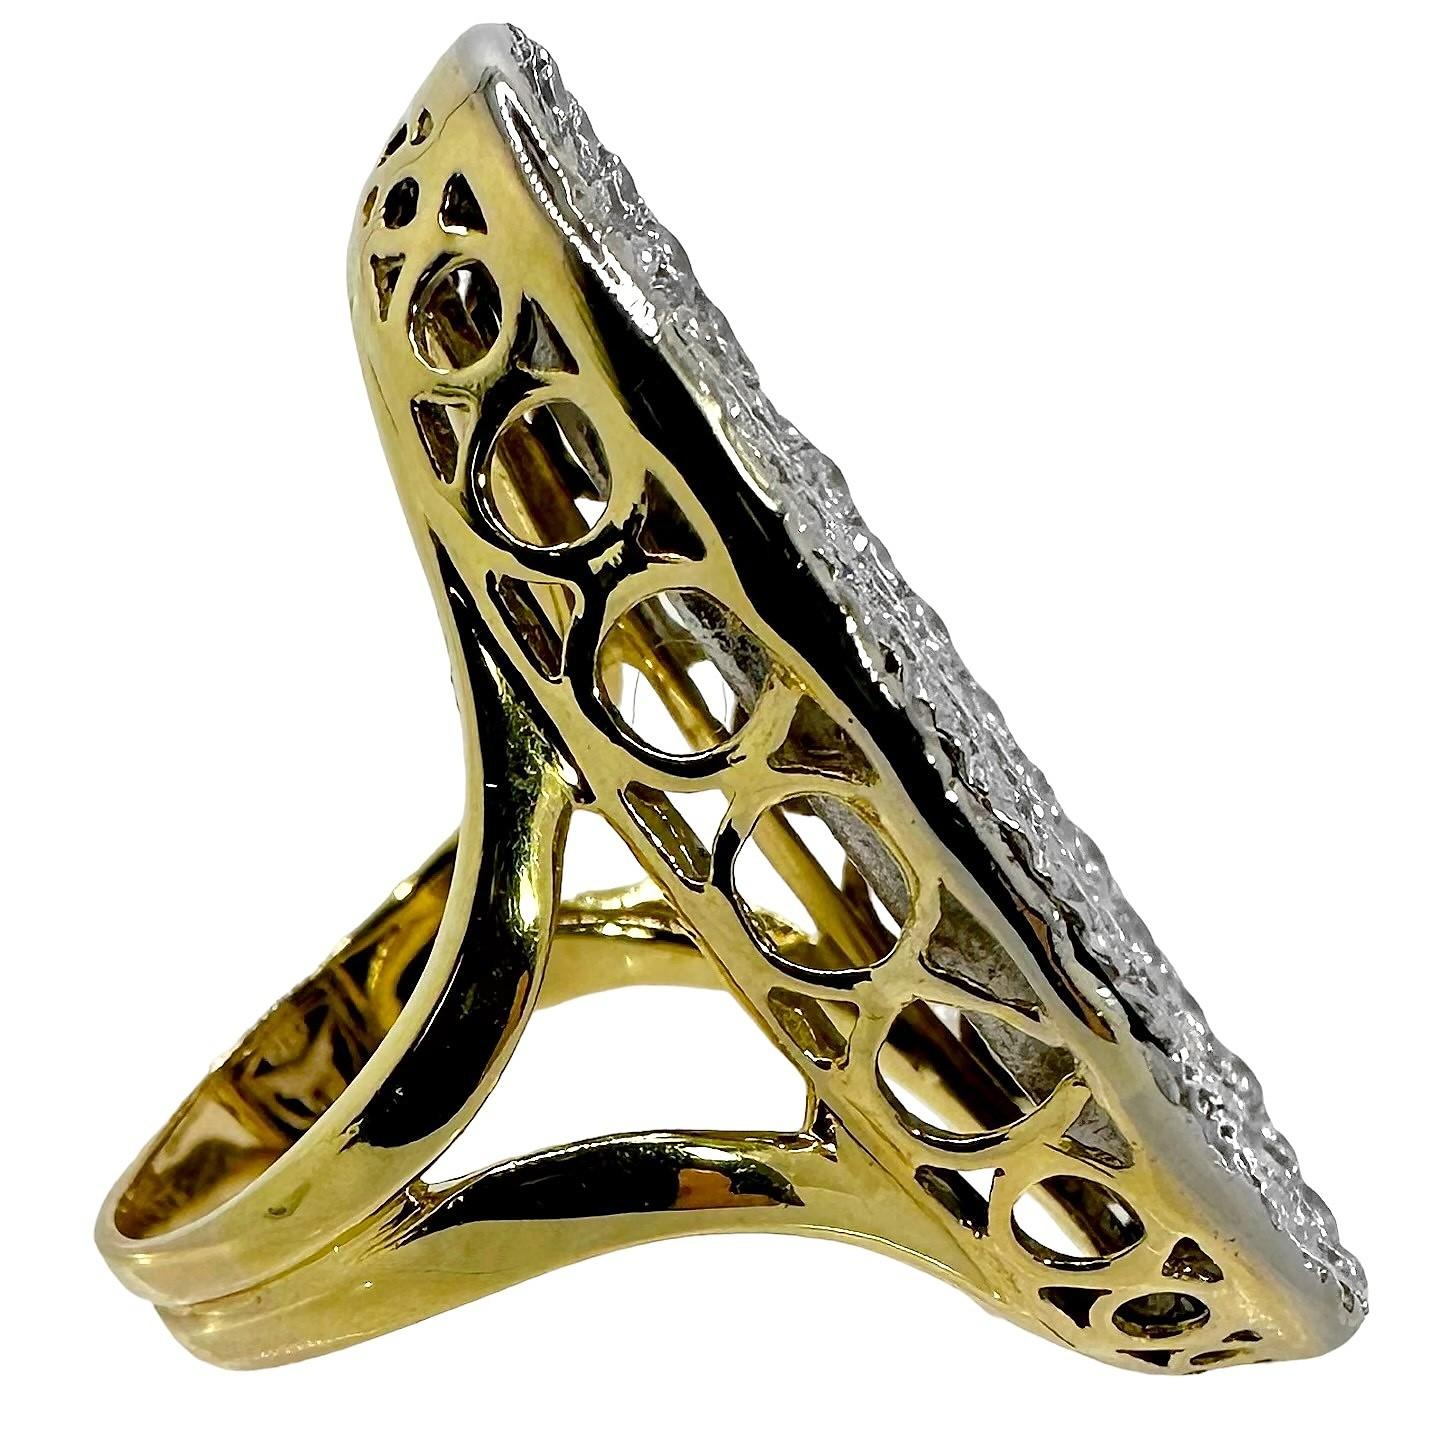 Modern Onyx, Diamond and 18K Gold, Oval Shaped Ring, 1.25 Inches Long by .75 Inch Wide For Sale